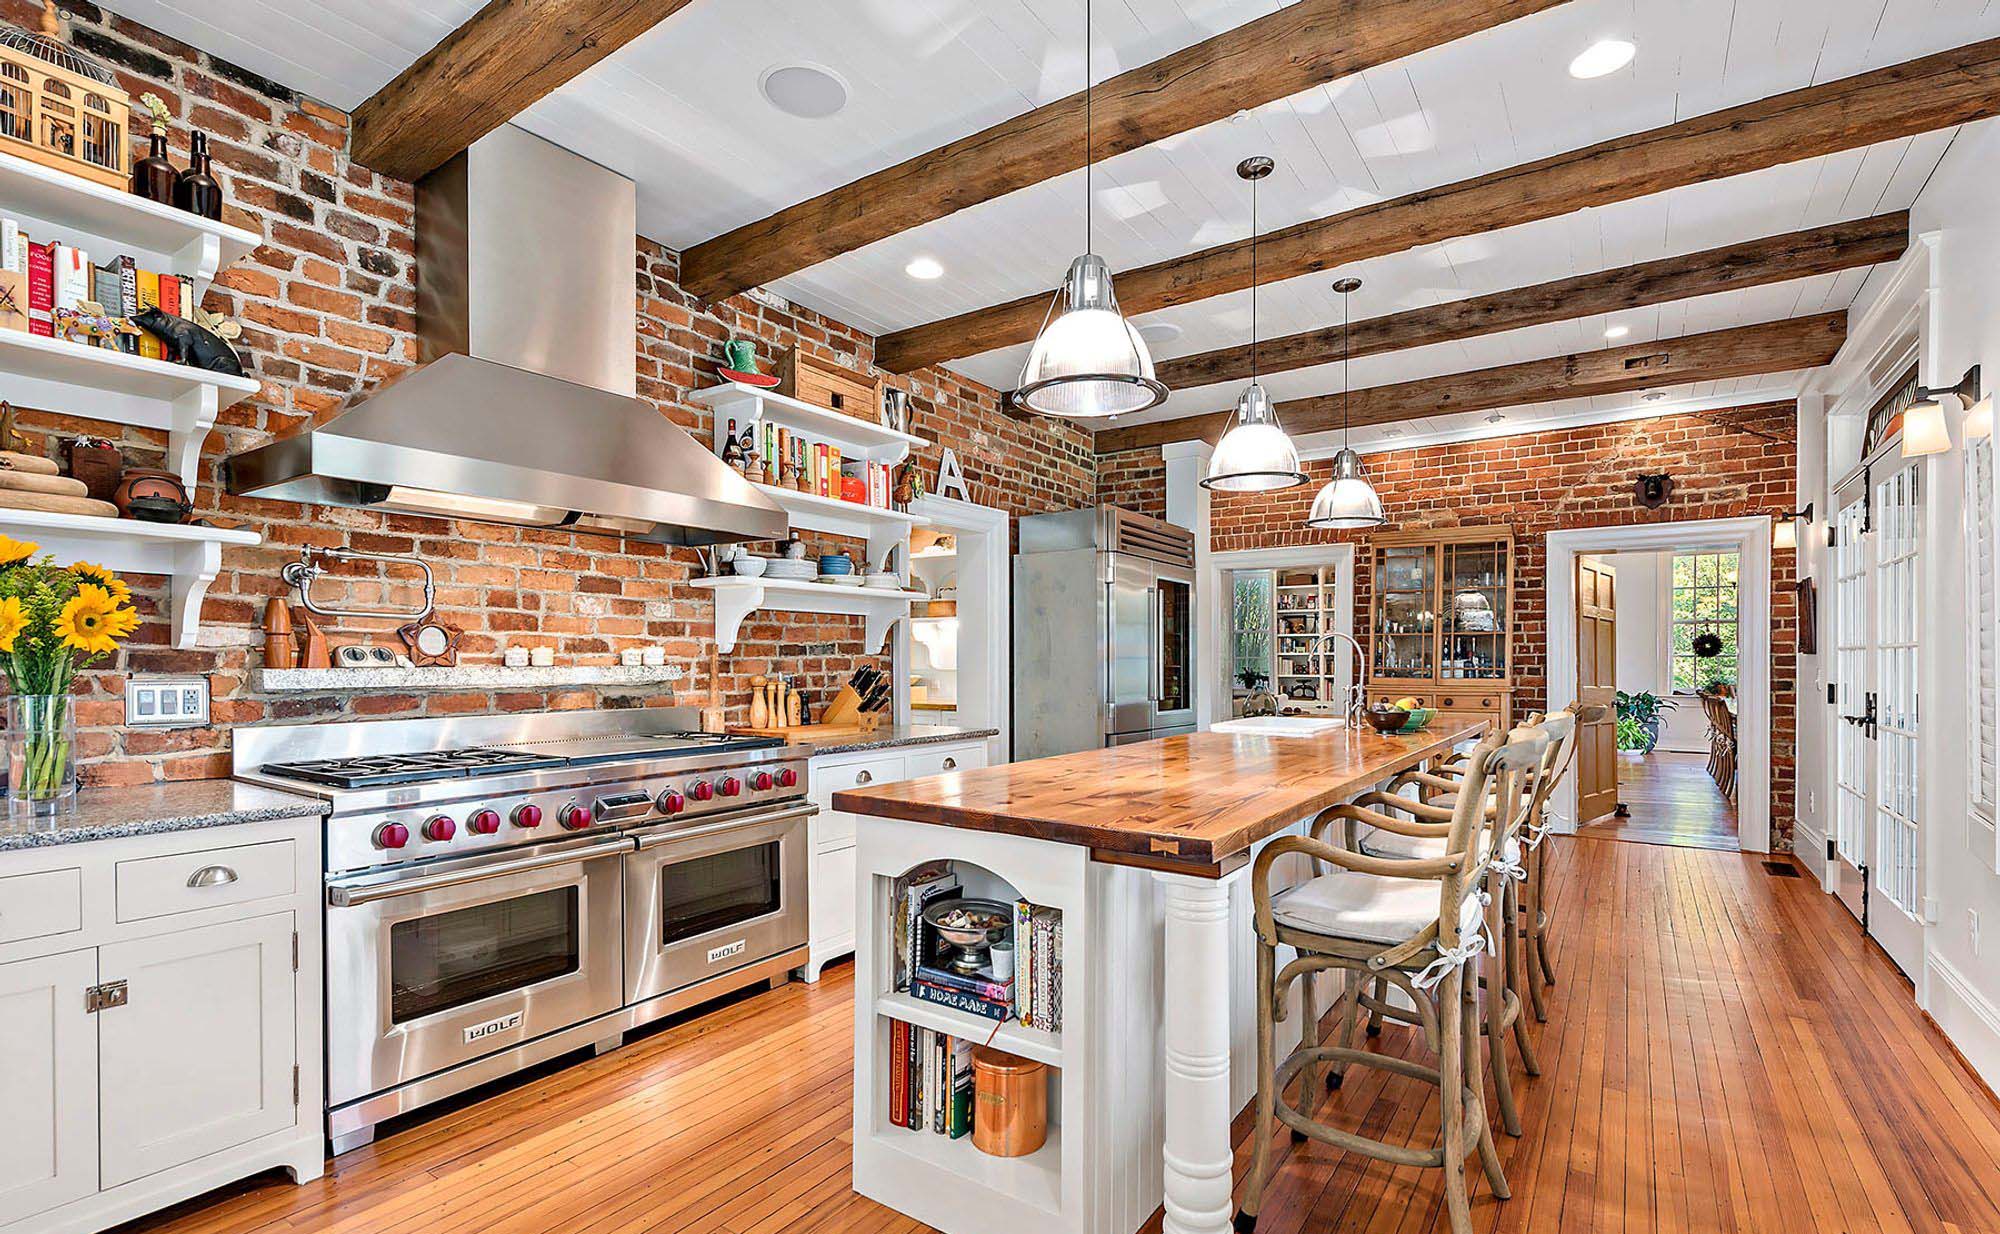 red brick walls in the kitchen with exposed real wood ceiling beams